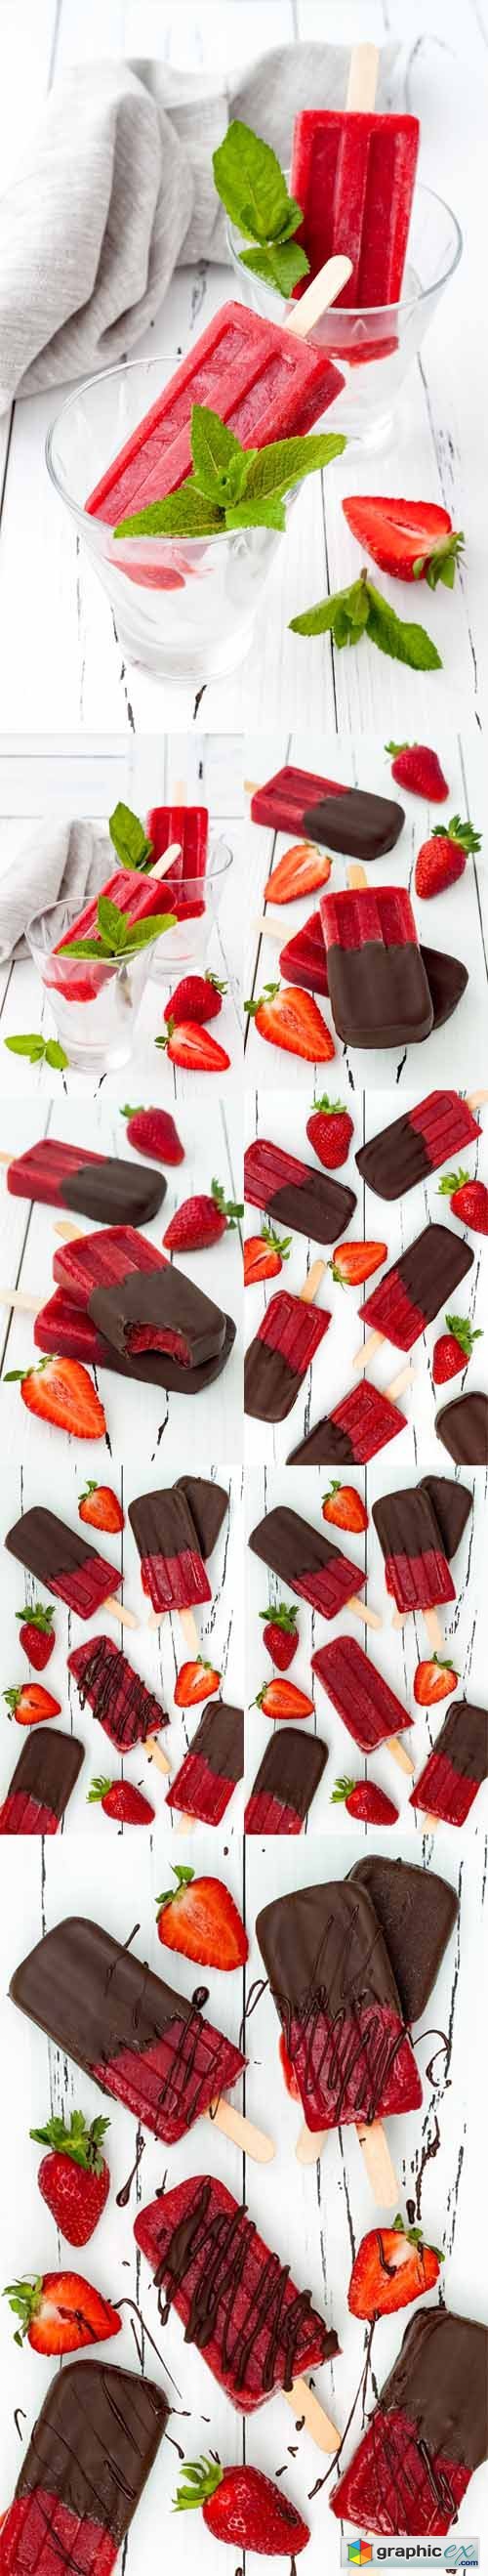 Photo Set - Chocolate Dipped Strawberry Red wine Popsicles